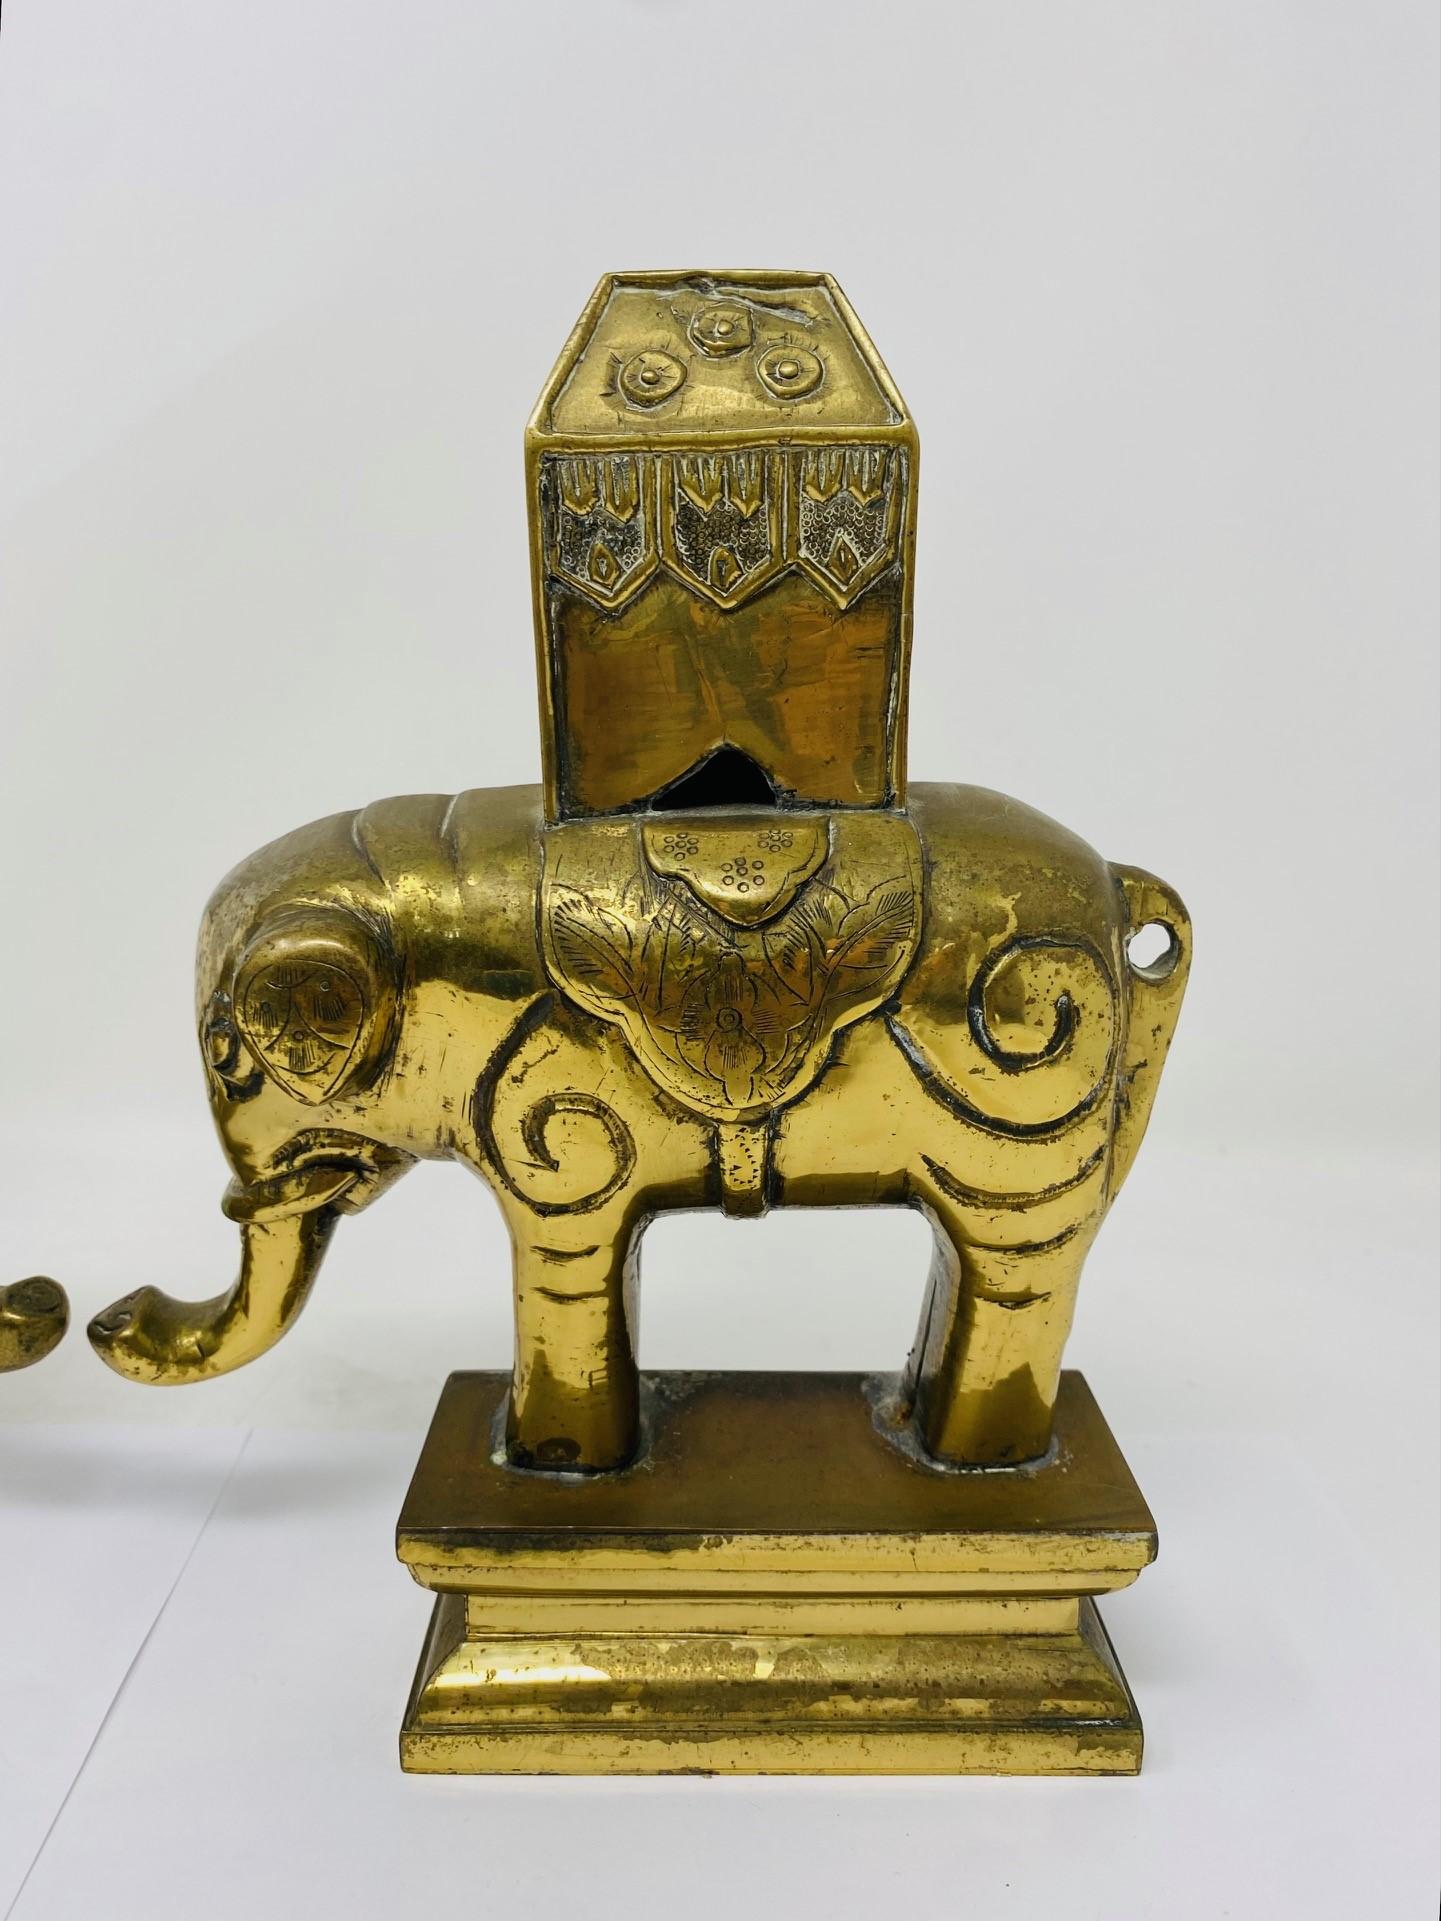 Vintage 1940s Pair of Sculptural Elephant Bookends in Solid Brass In Good Condition For Sale In San Diego, CA